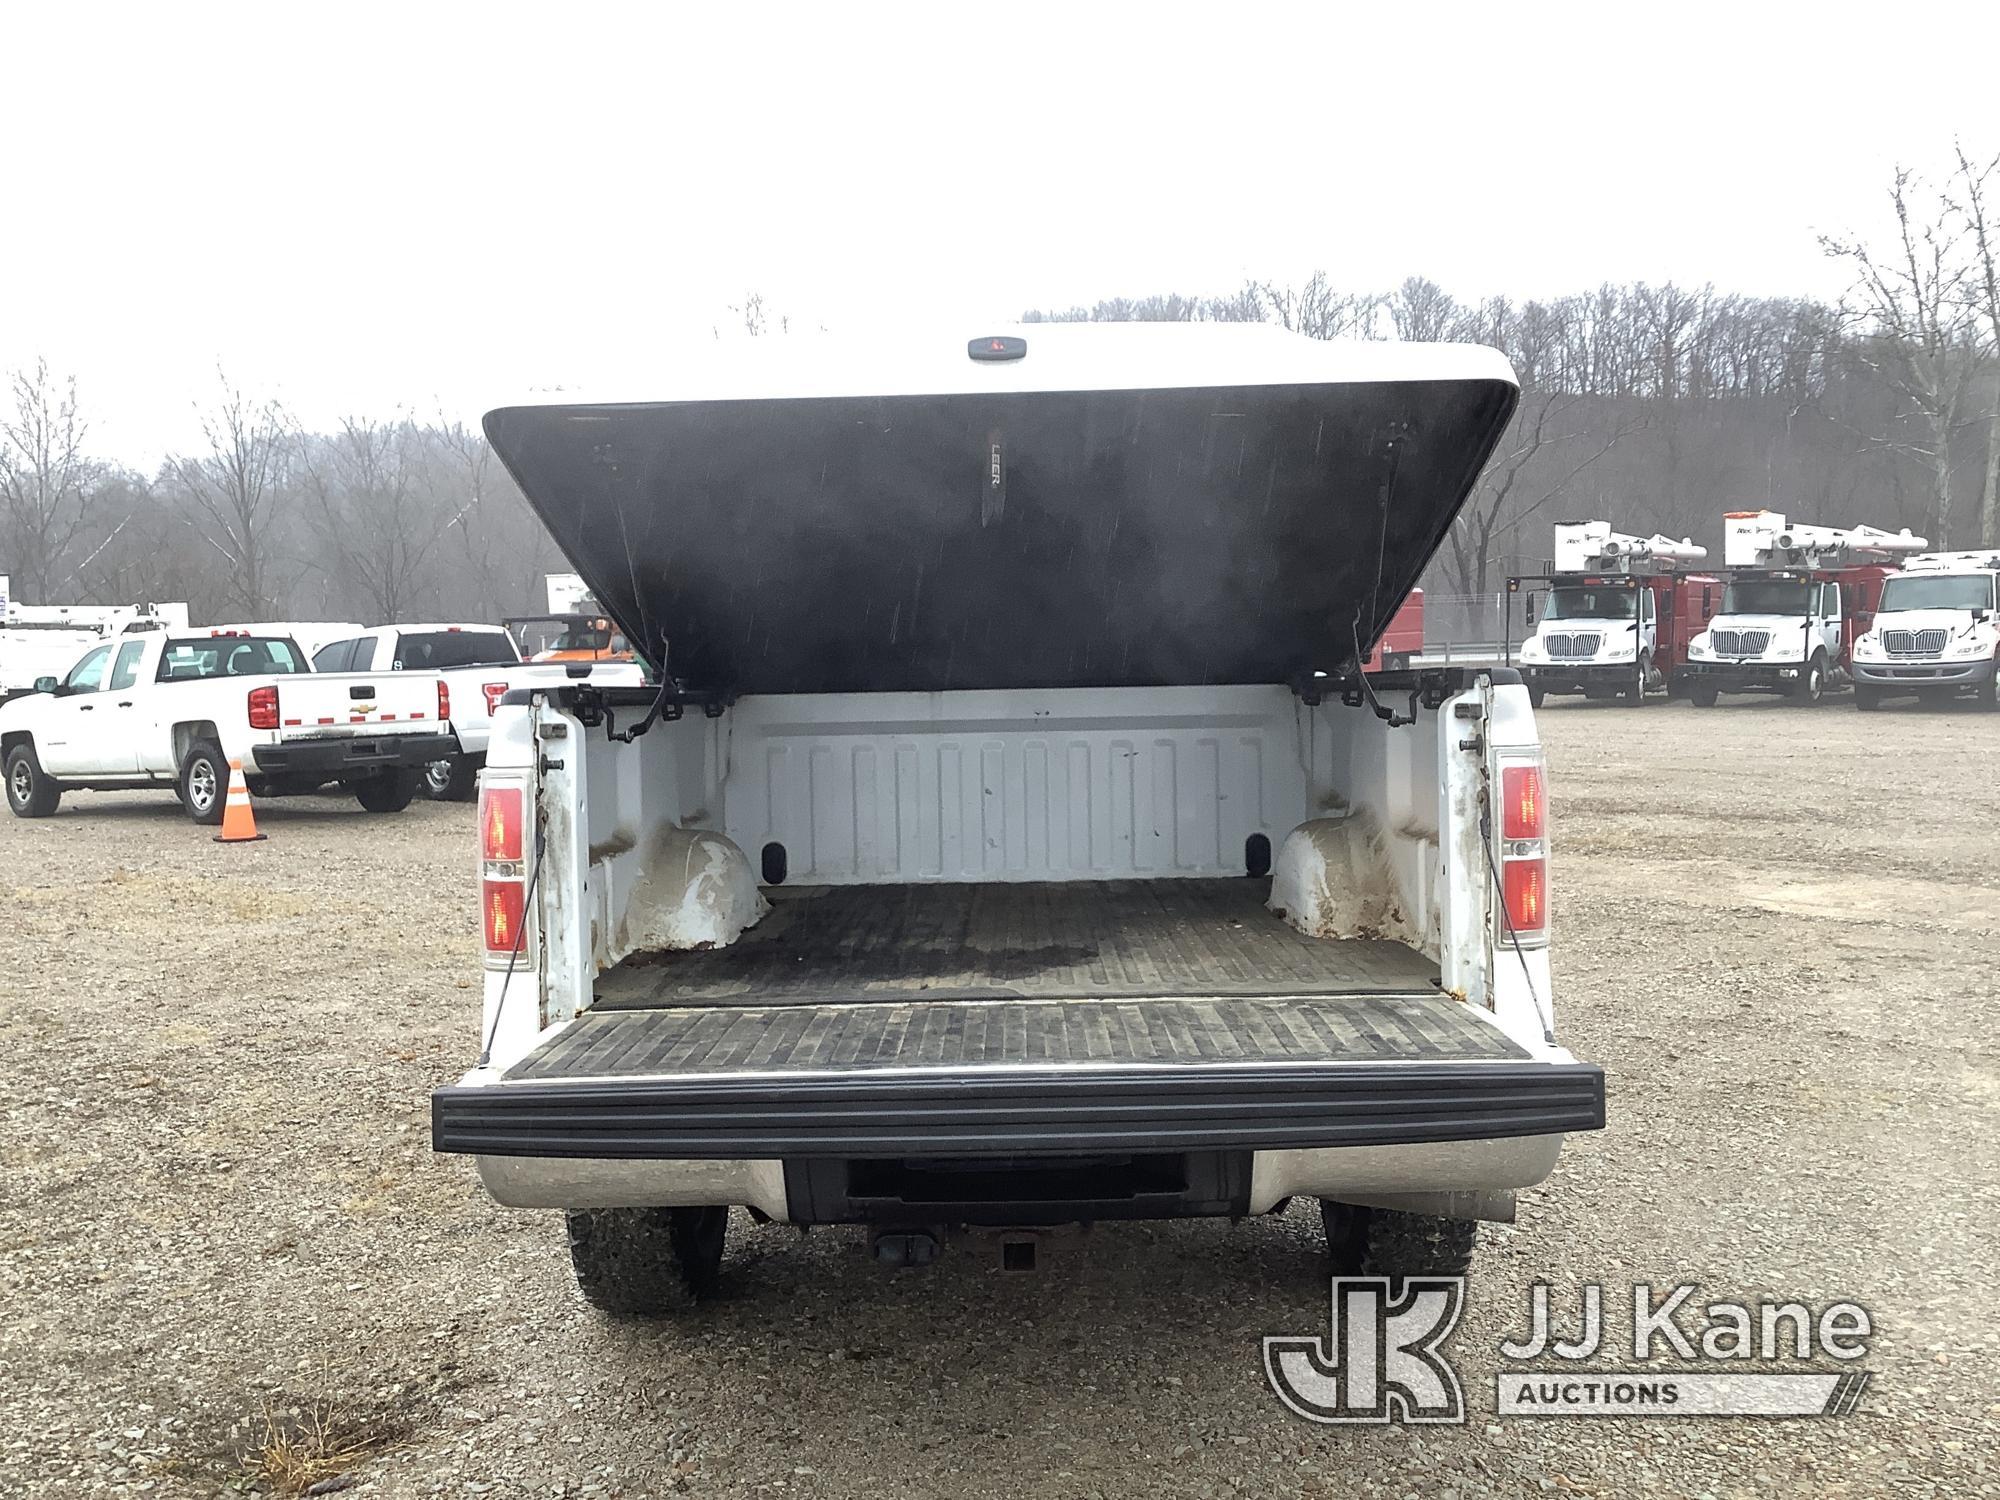 (Smock, PA) 2014 Ford F150 4x4 Extended-Cab Pickup Truck Title Delay) (Runs & Moves, Rust Damage